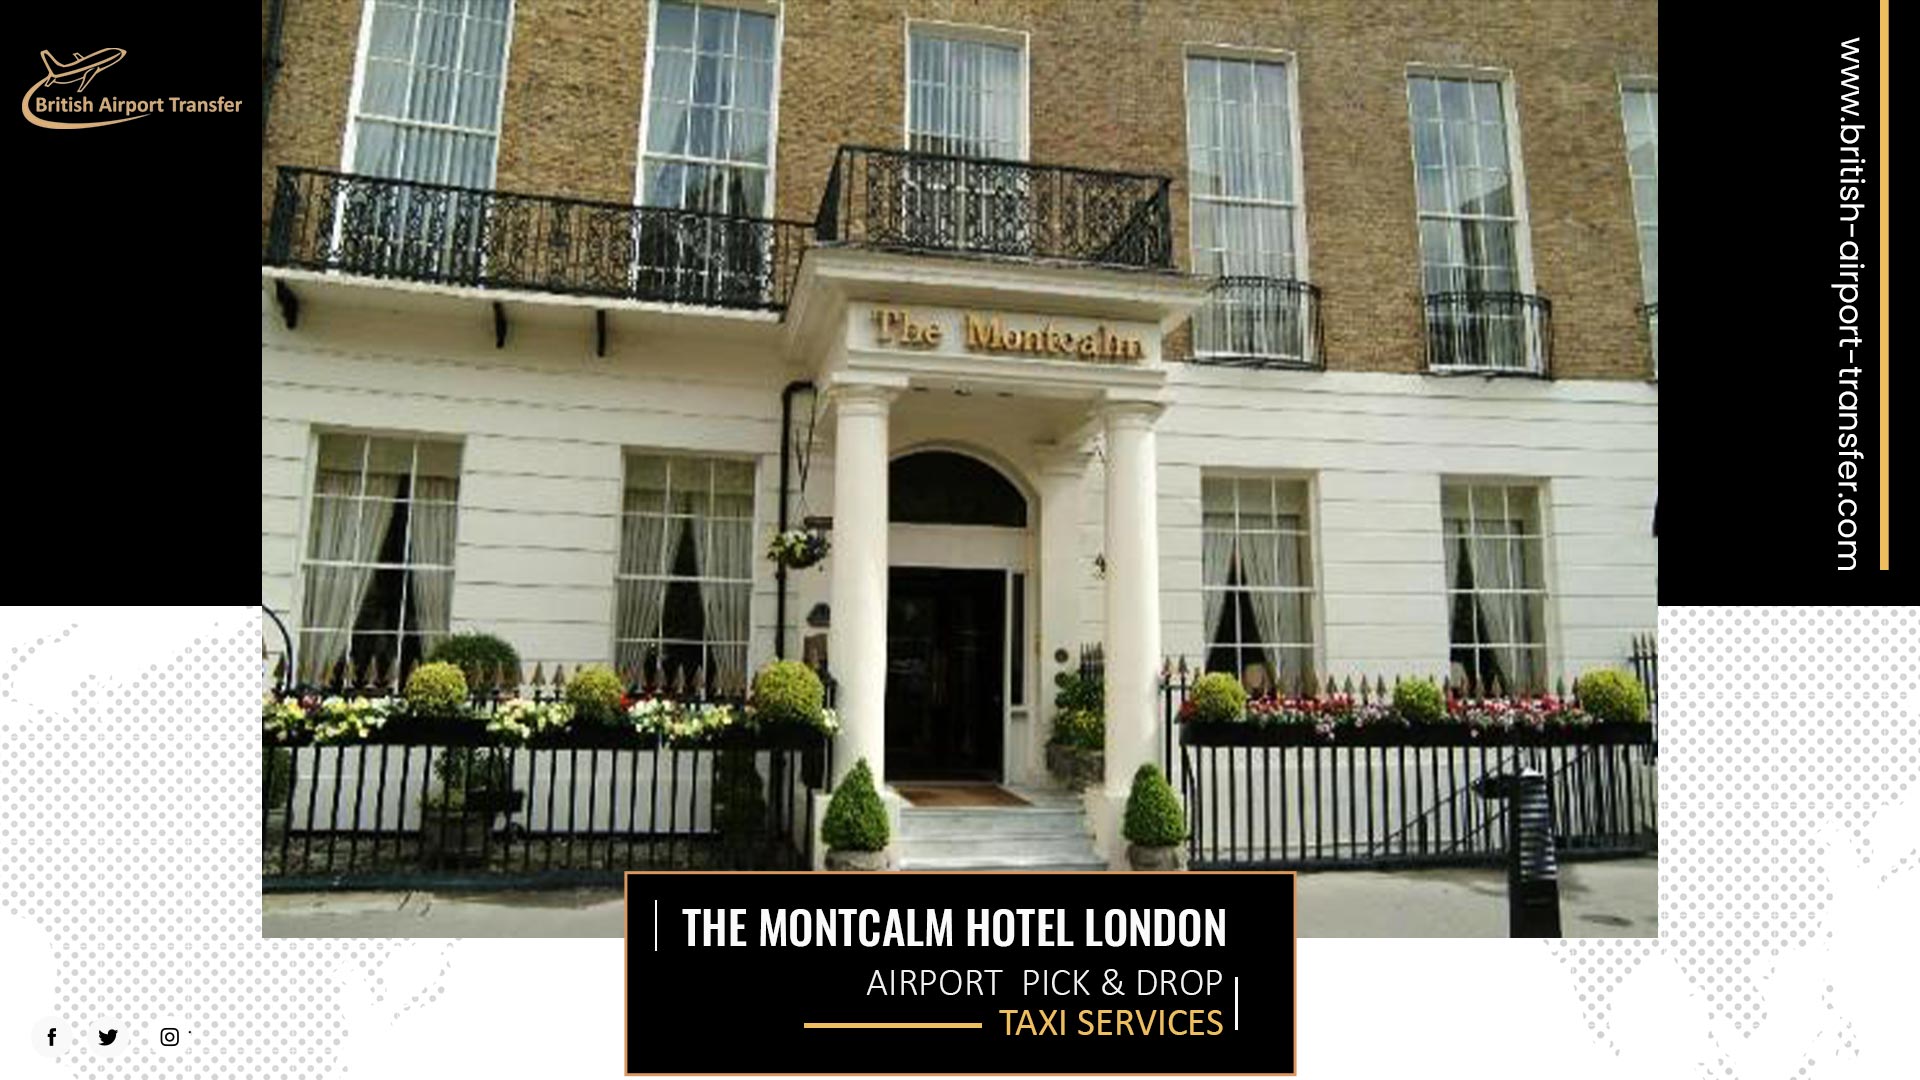 Taxi Cab – The Montcalm Hotel London – Marble Arch / W1H 7TN